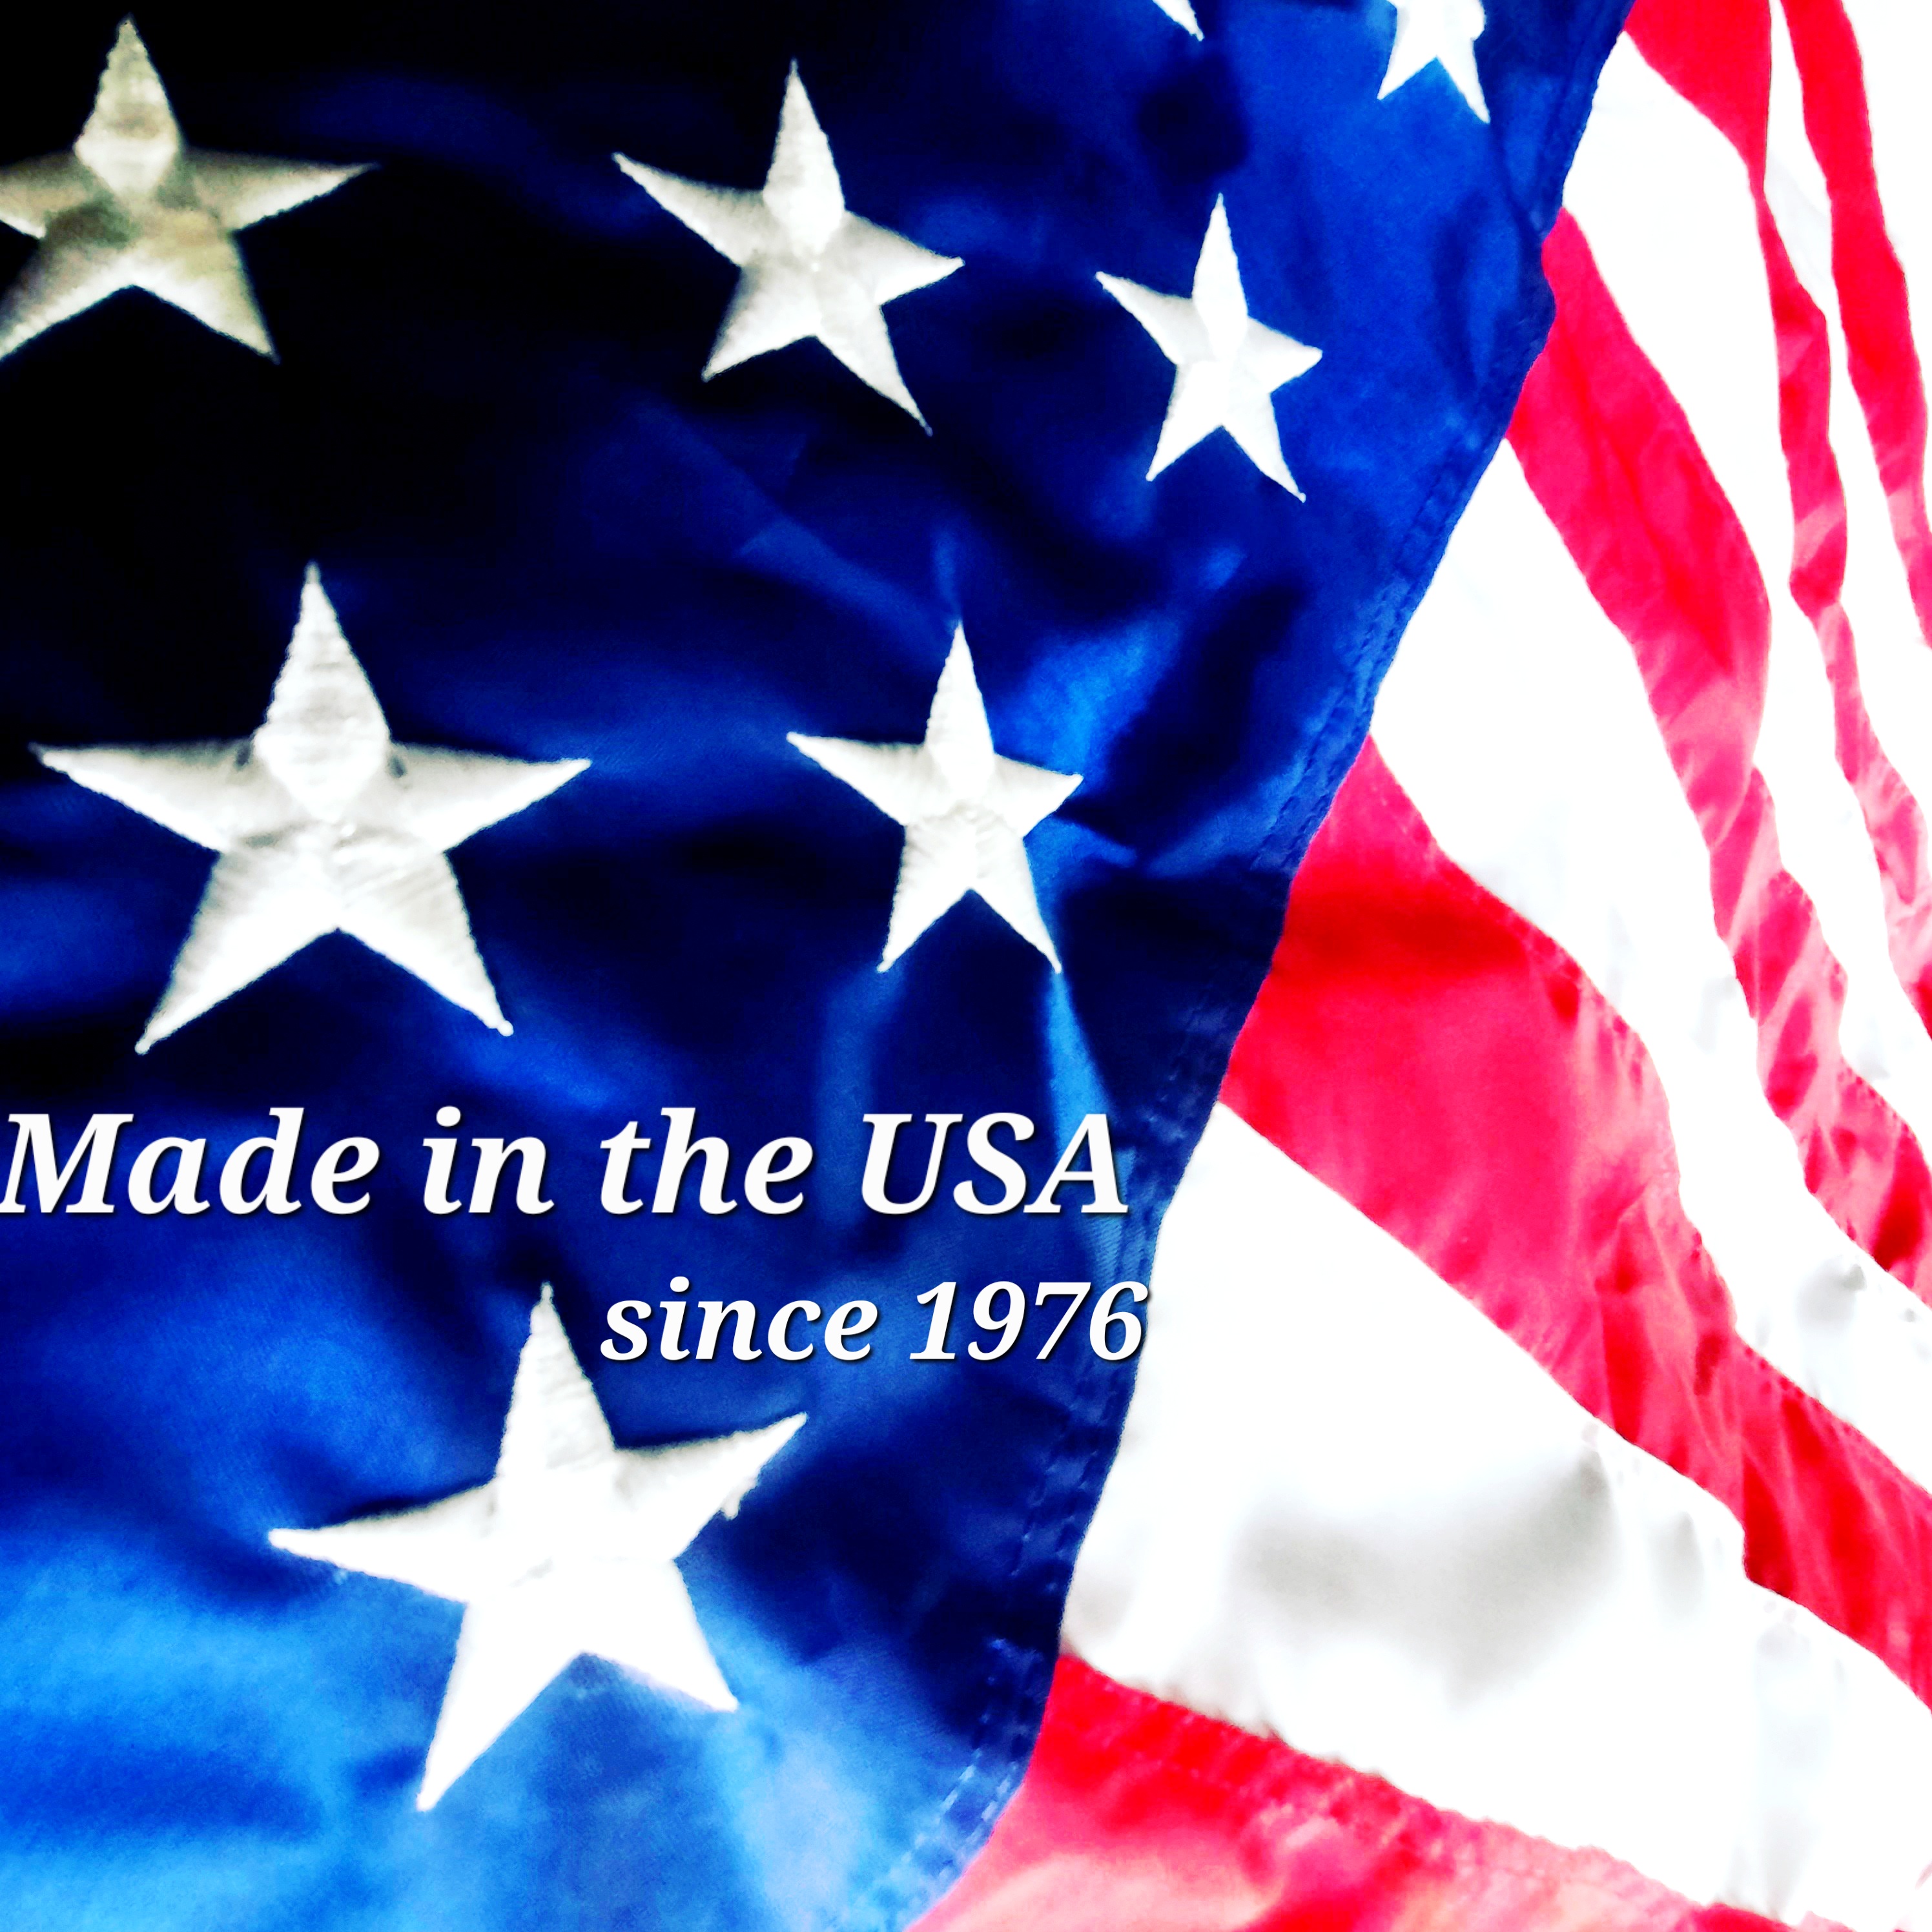 Made in the USA since 1976